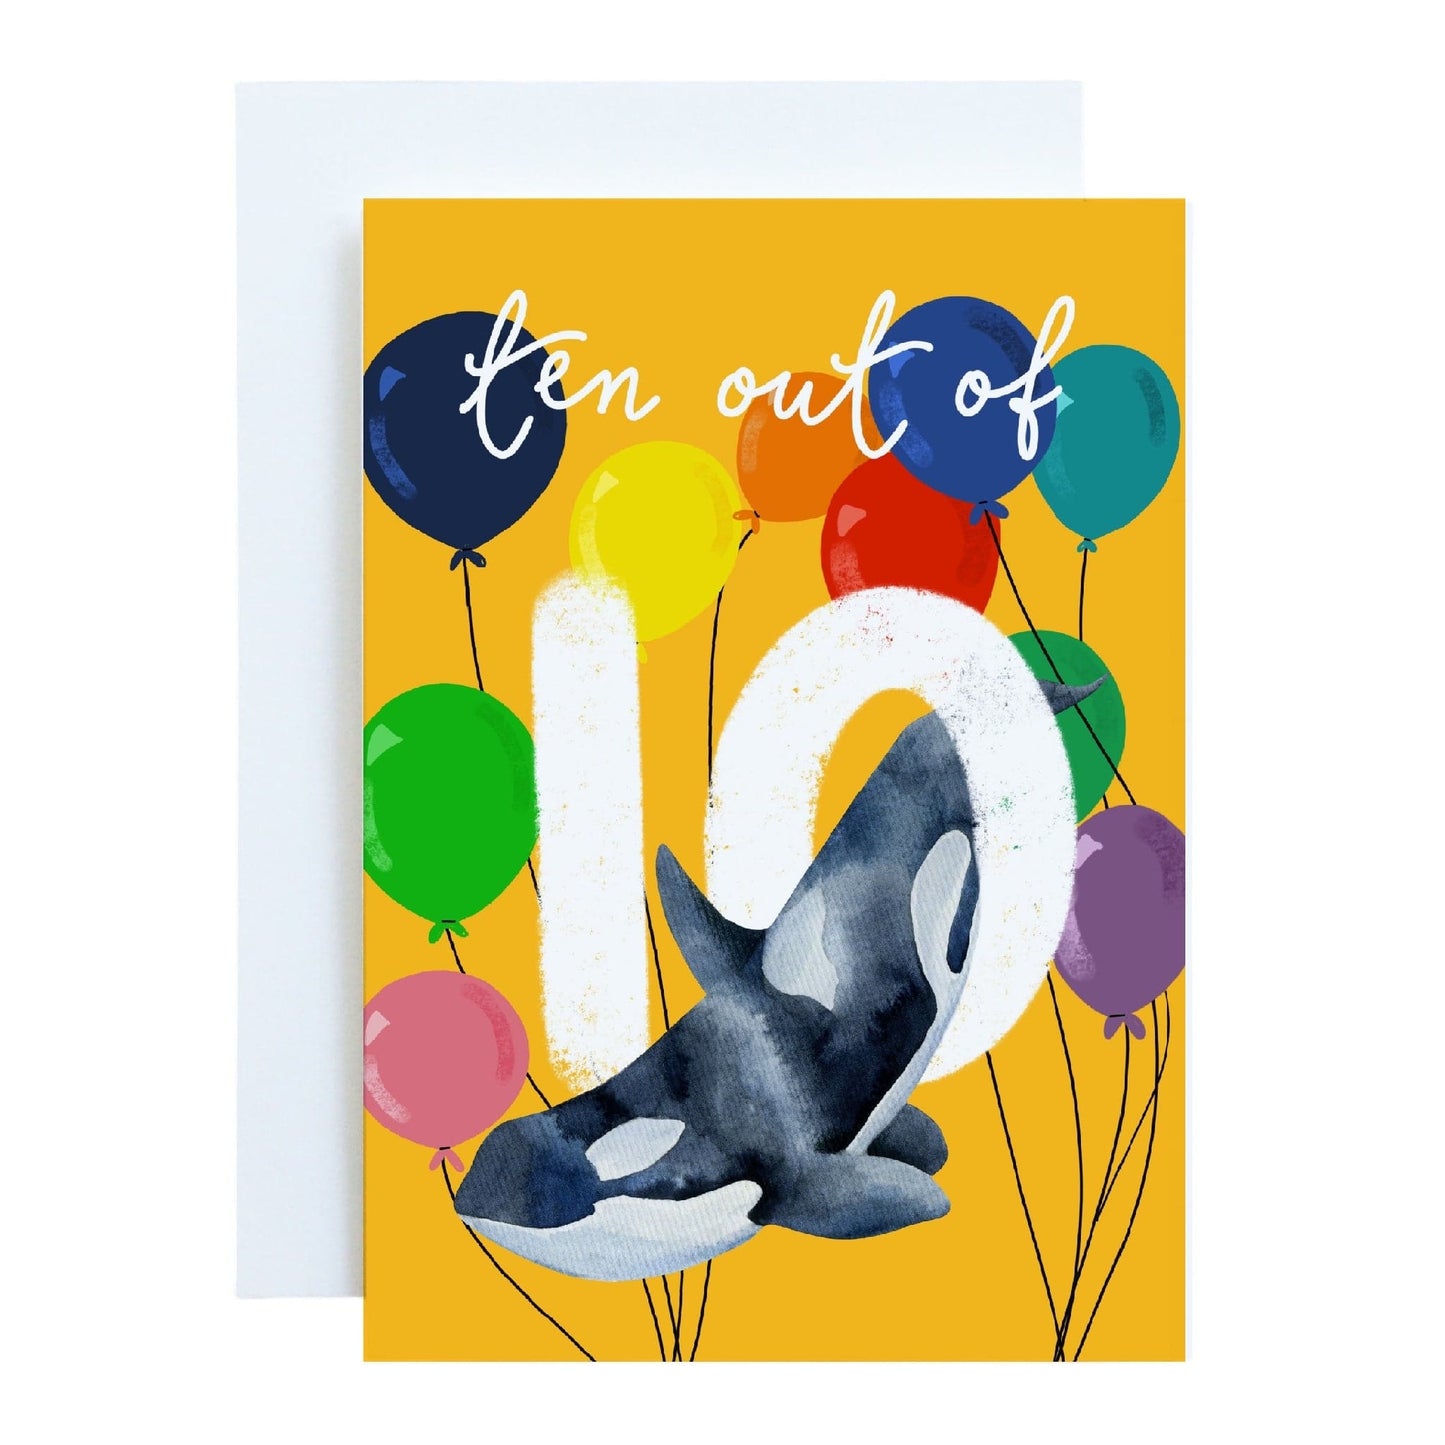 And Hope Designs Cards 10 - Tenth birthday Card - Bright “Ten out of 10” with orca whale